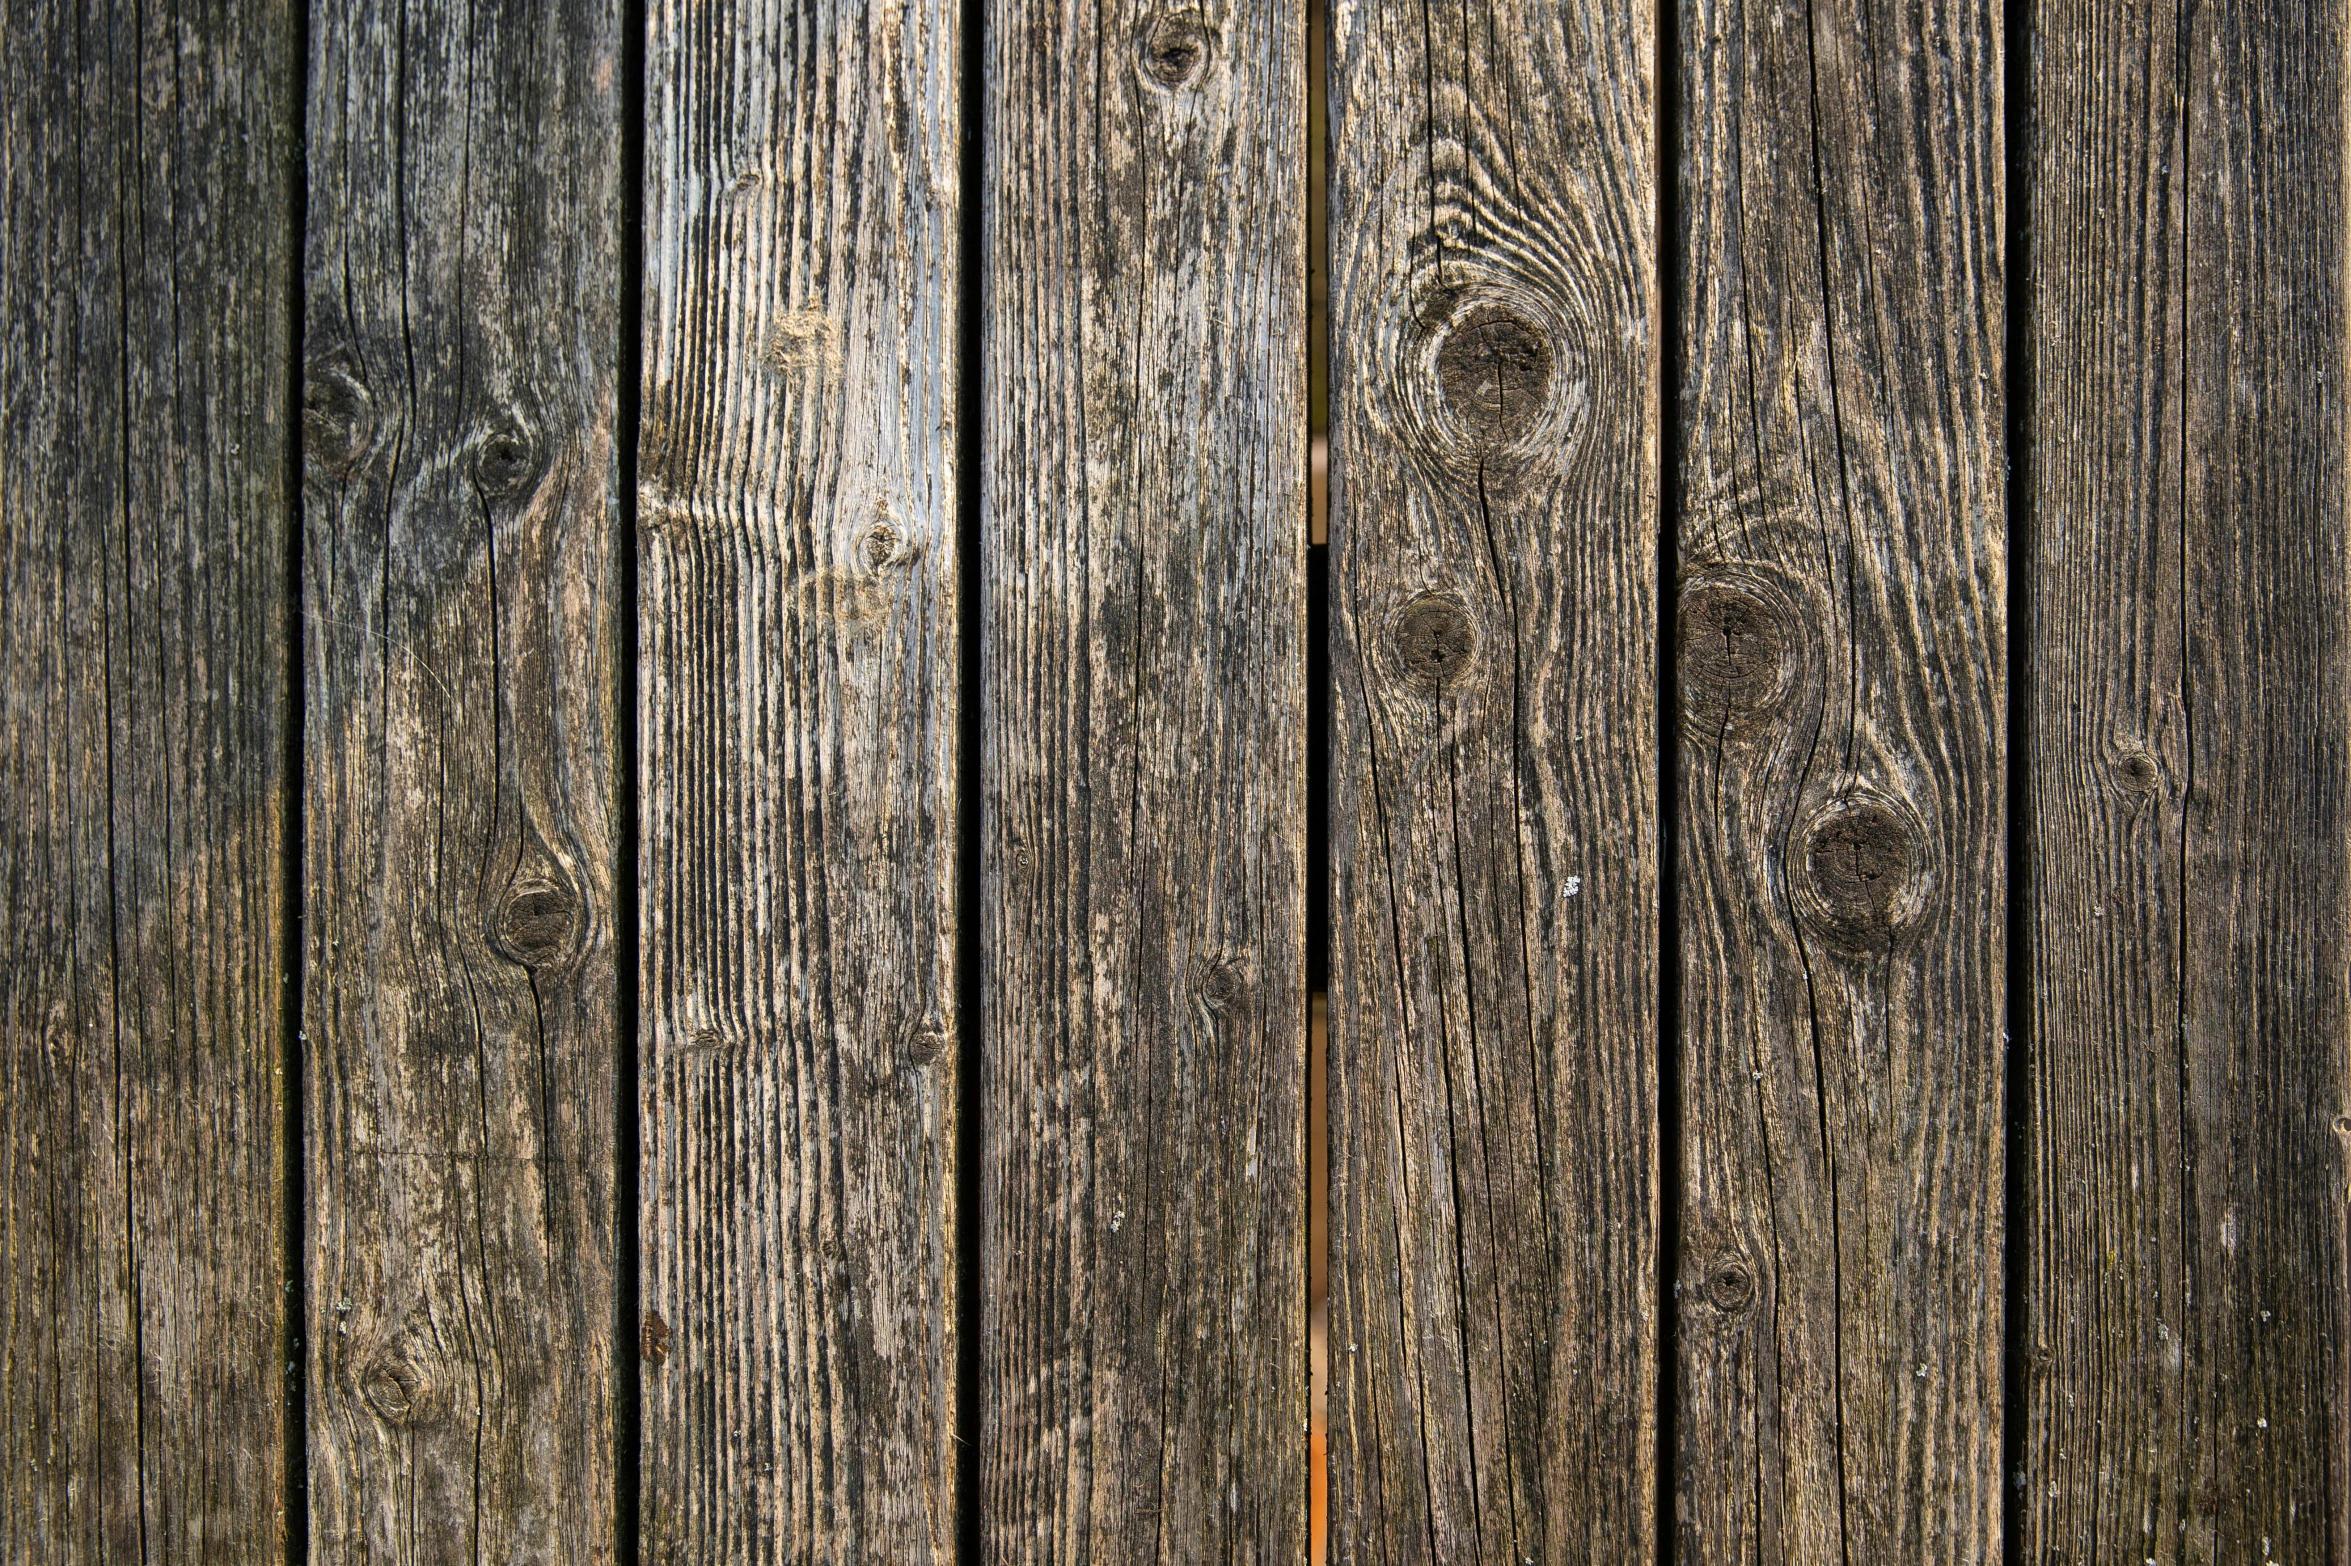 a fire hydrant sitting on top of a wooden fence, pexels, renaissance, seamless wood texture, black vertical slatted timber, 17th-century, stubbles